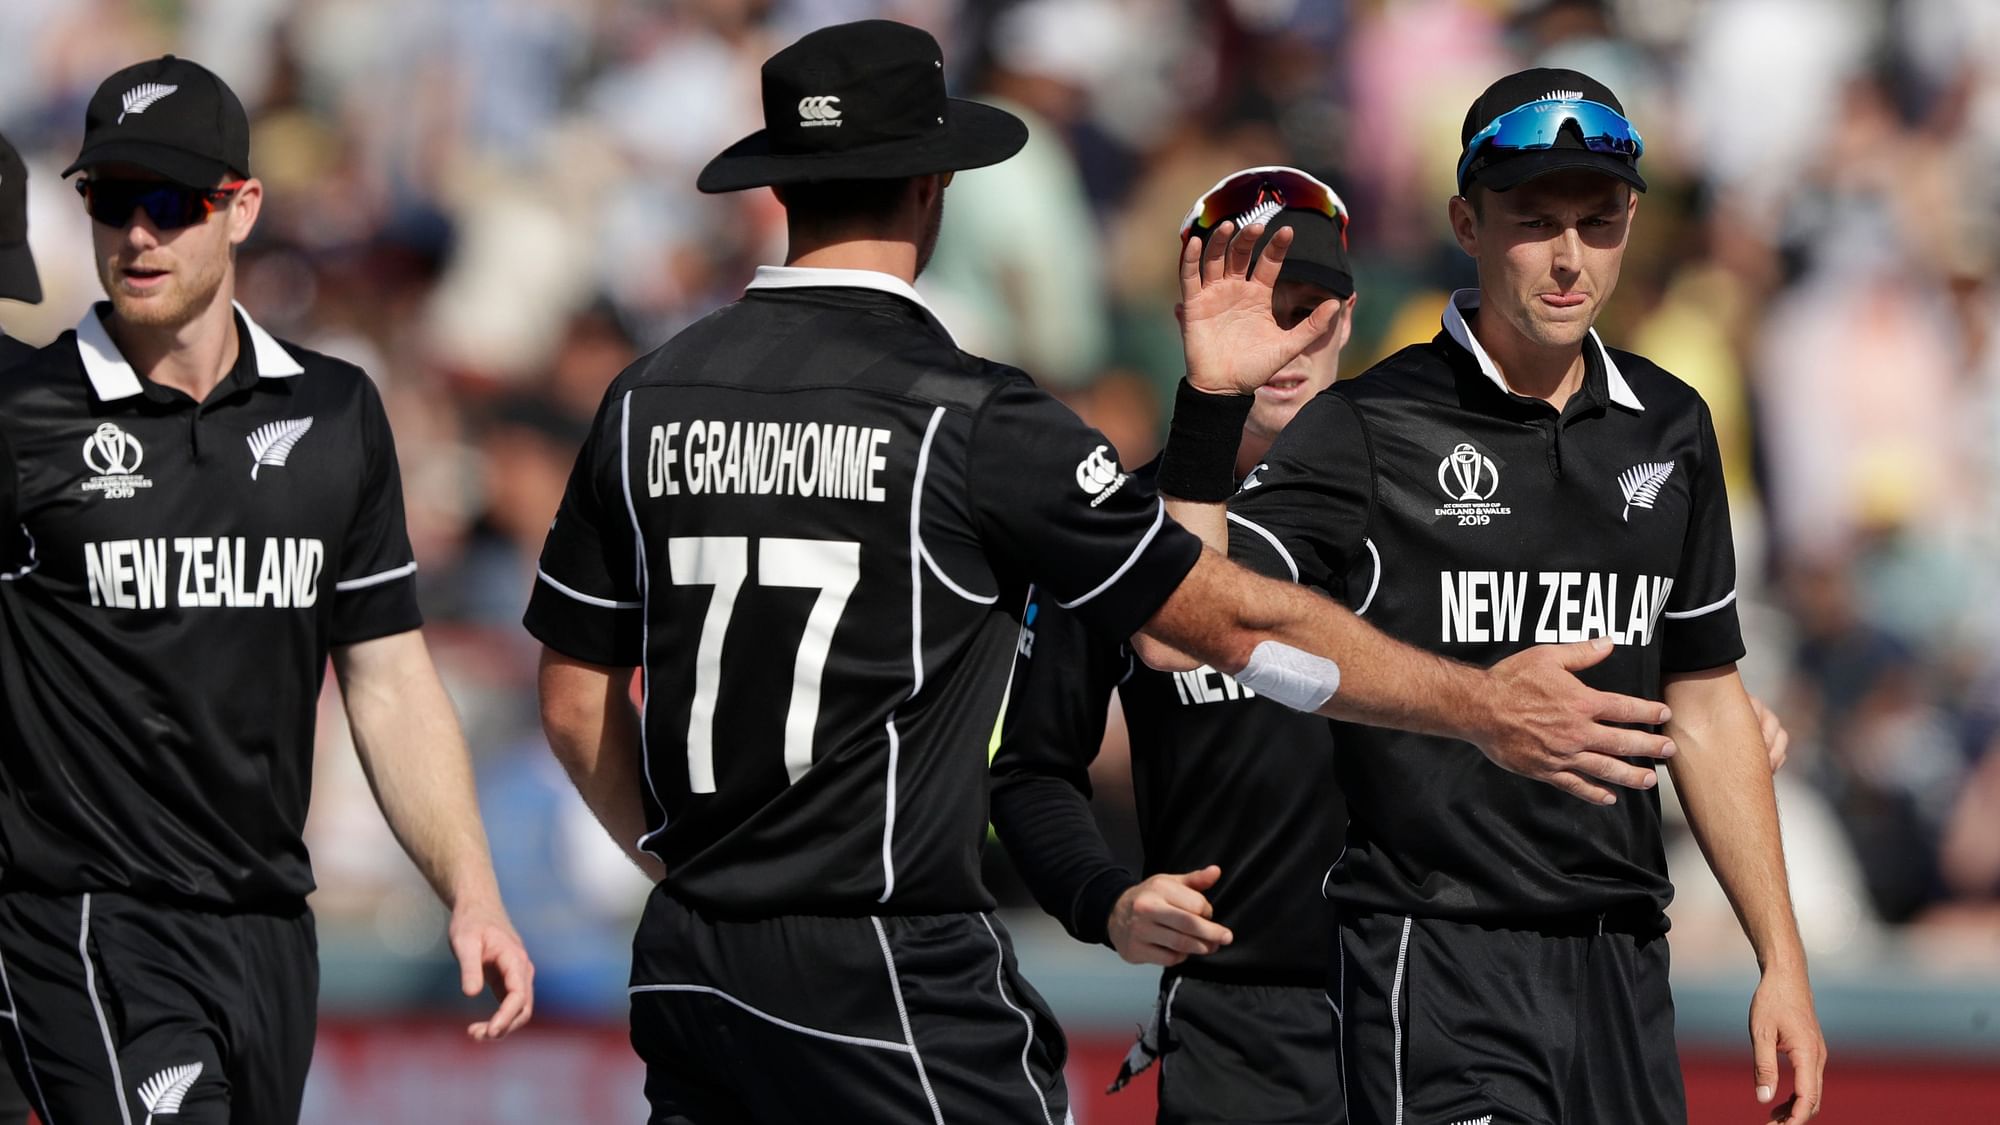 Boult said the 2015 World Cup final loss hurt less as compared to the heartbreak at Lord’s